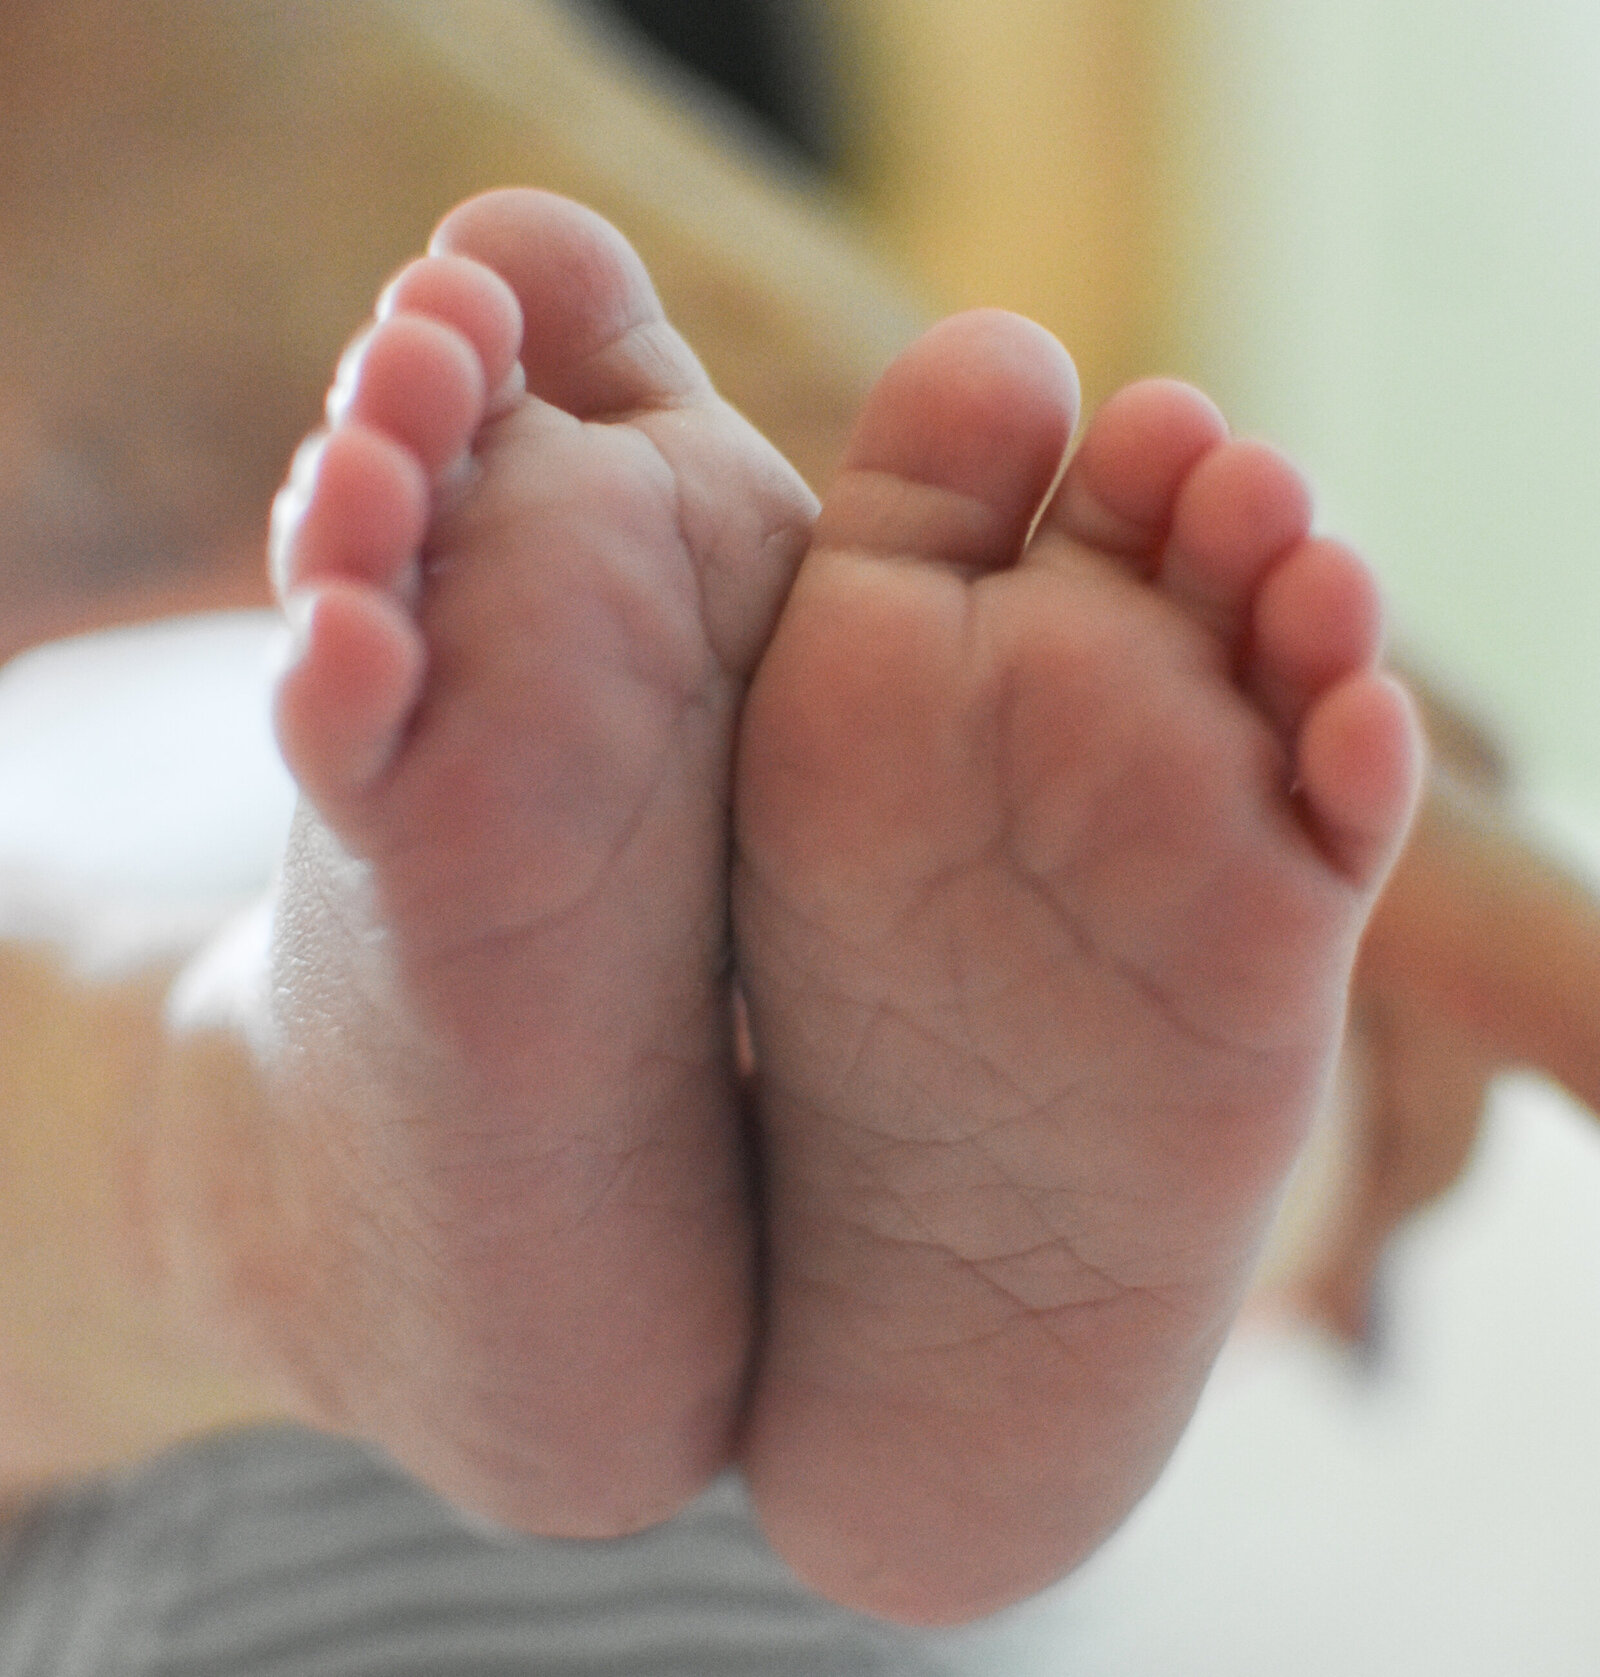 tiny baby feet photographed by Millz Photography in Greenville, SC